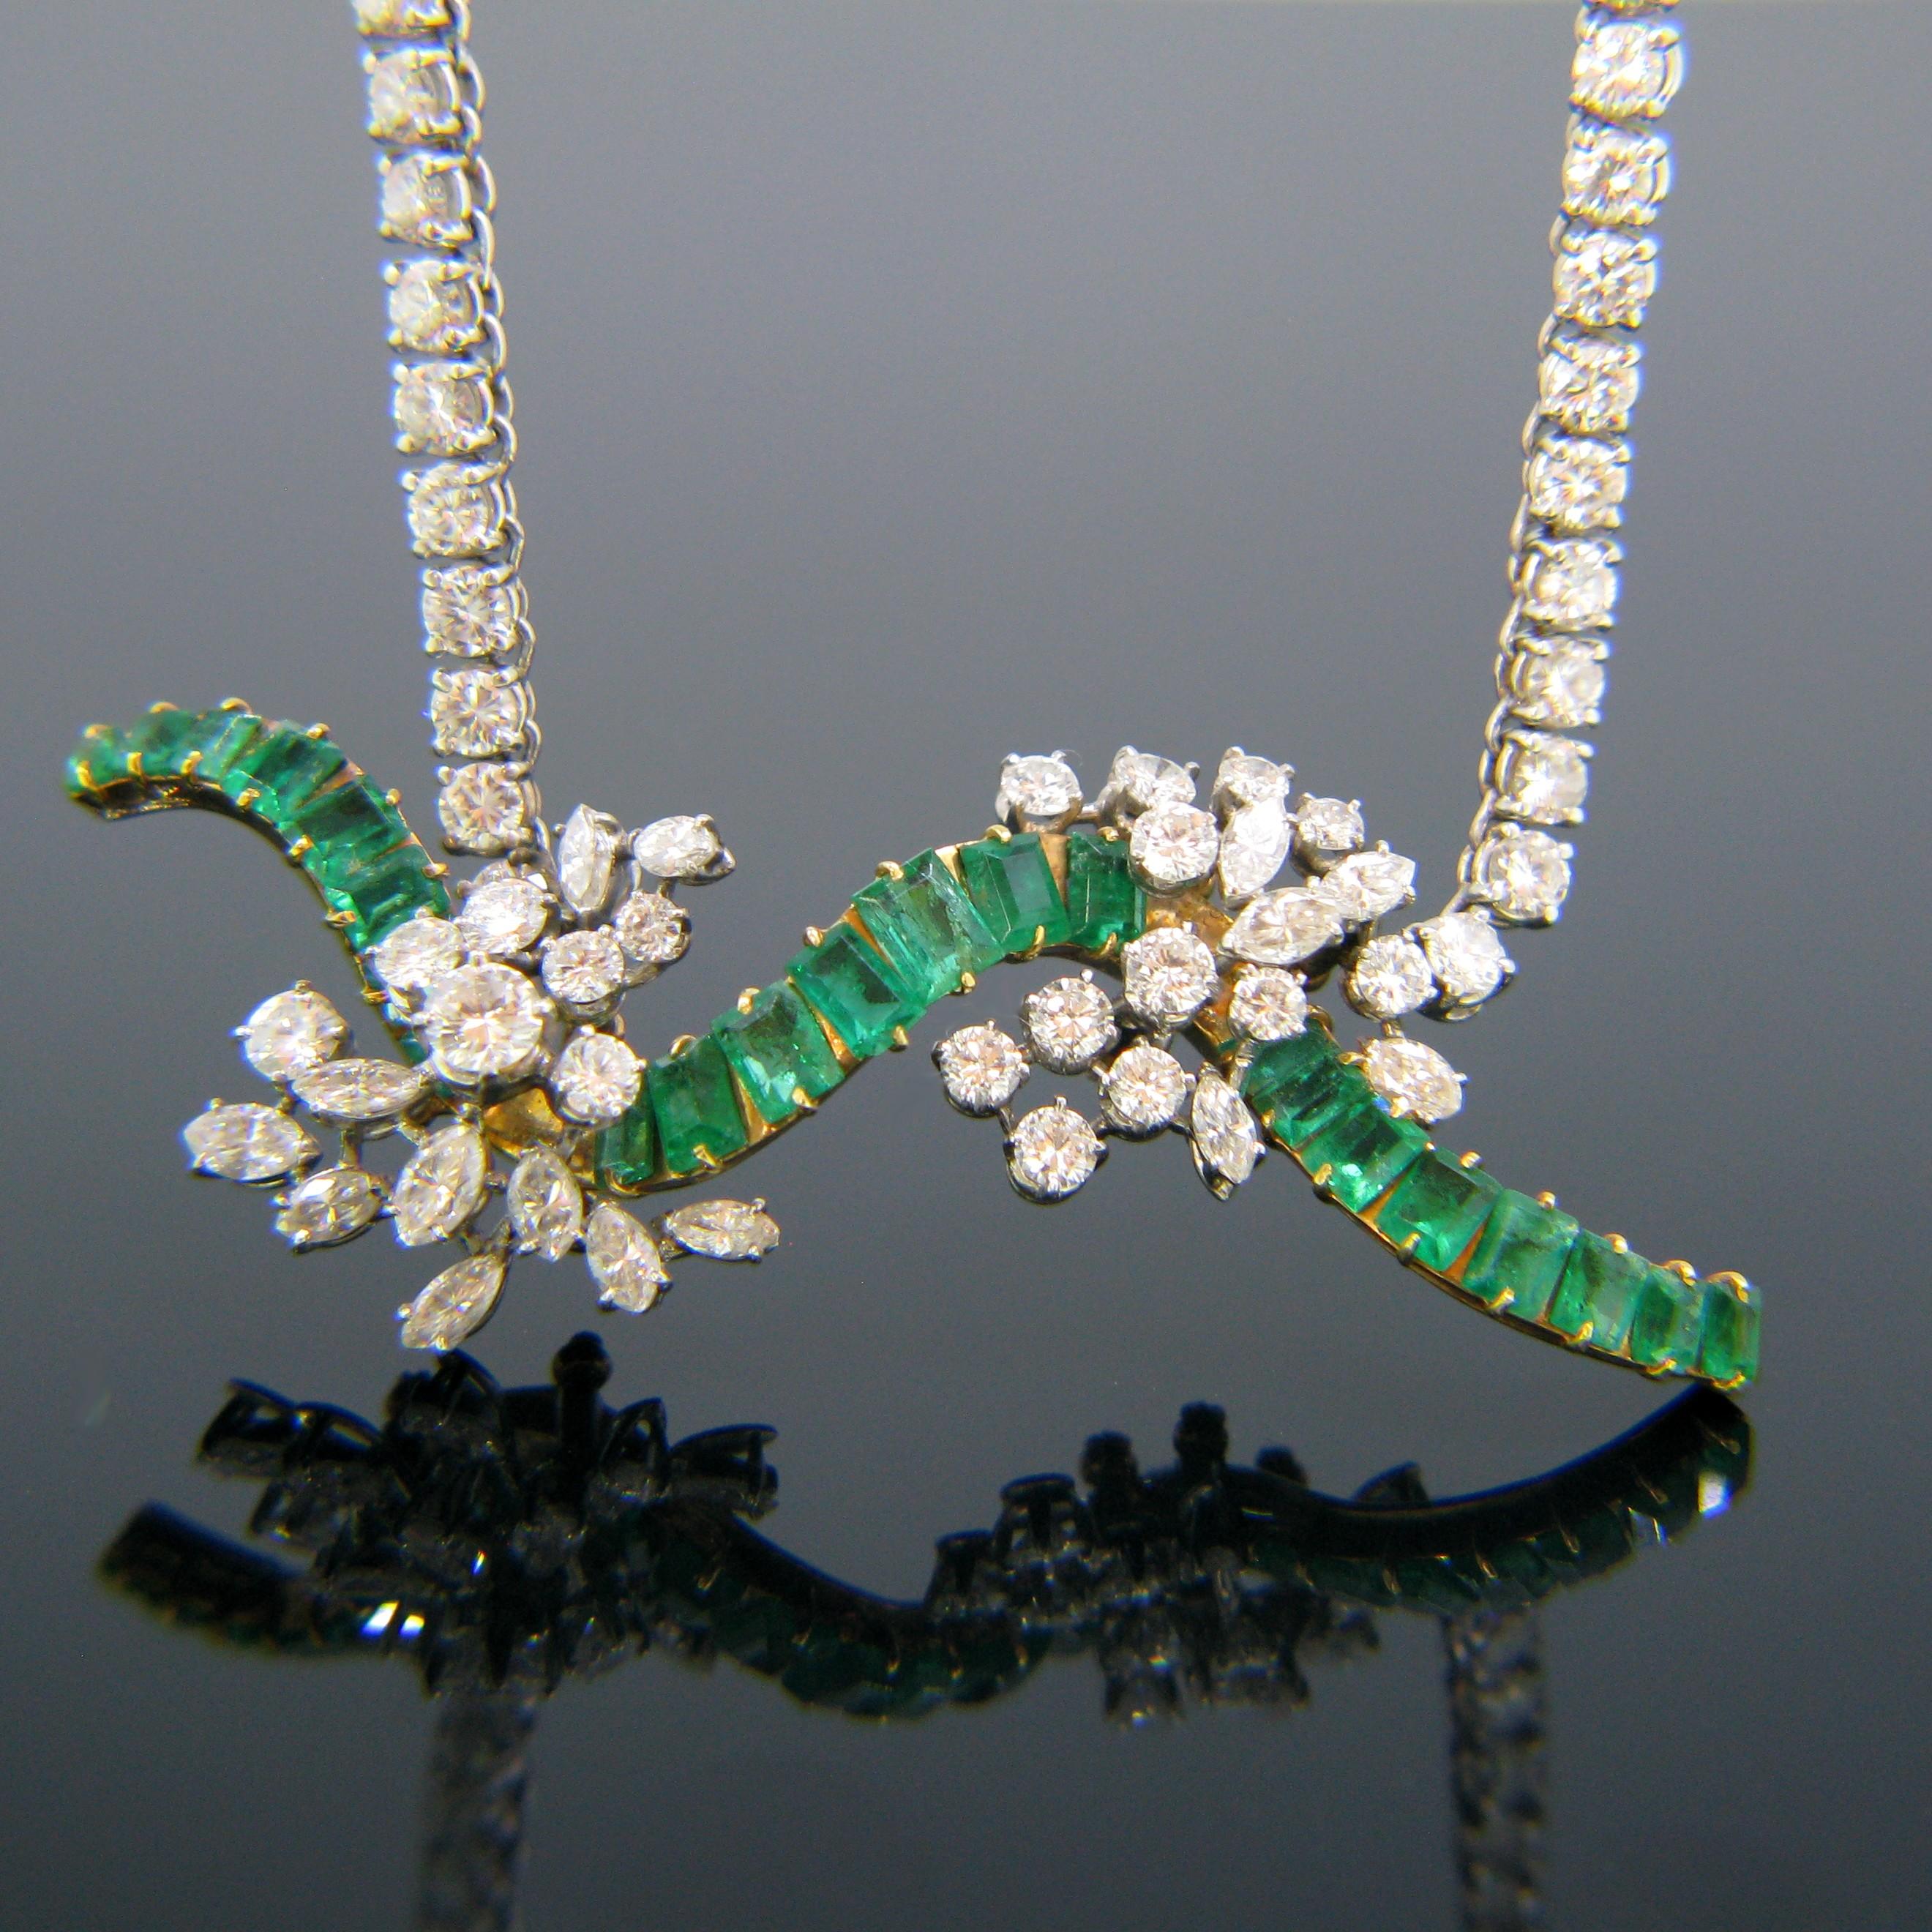 This beautiful necklace is fully made in 18kt yellow and white gold. It is set with 23 emeralds with a  total carat weight of around 4ct and 78 diamonds for a total carat weight of 8ct approximately. The necklace has a nice stylish design and looks